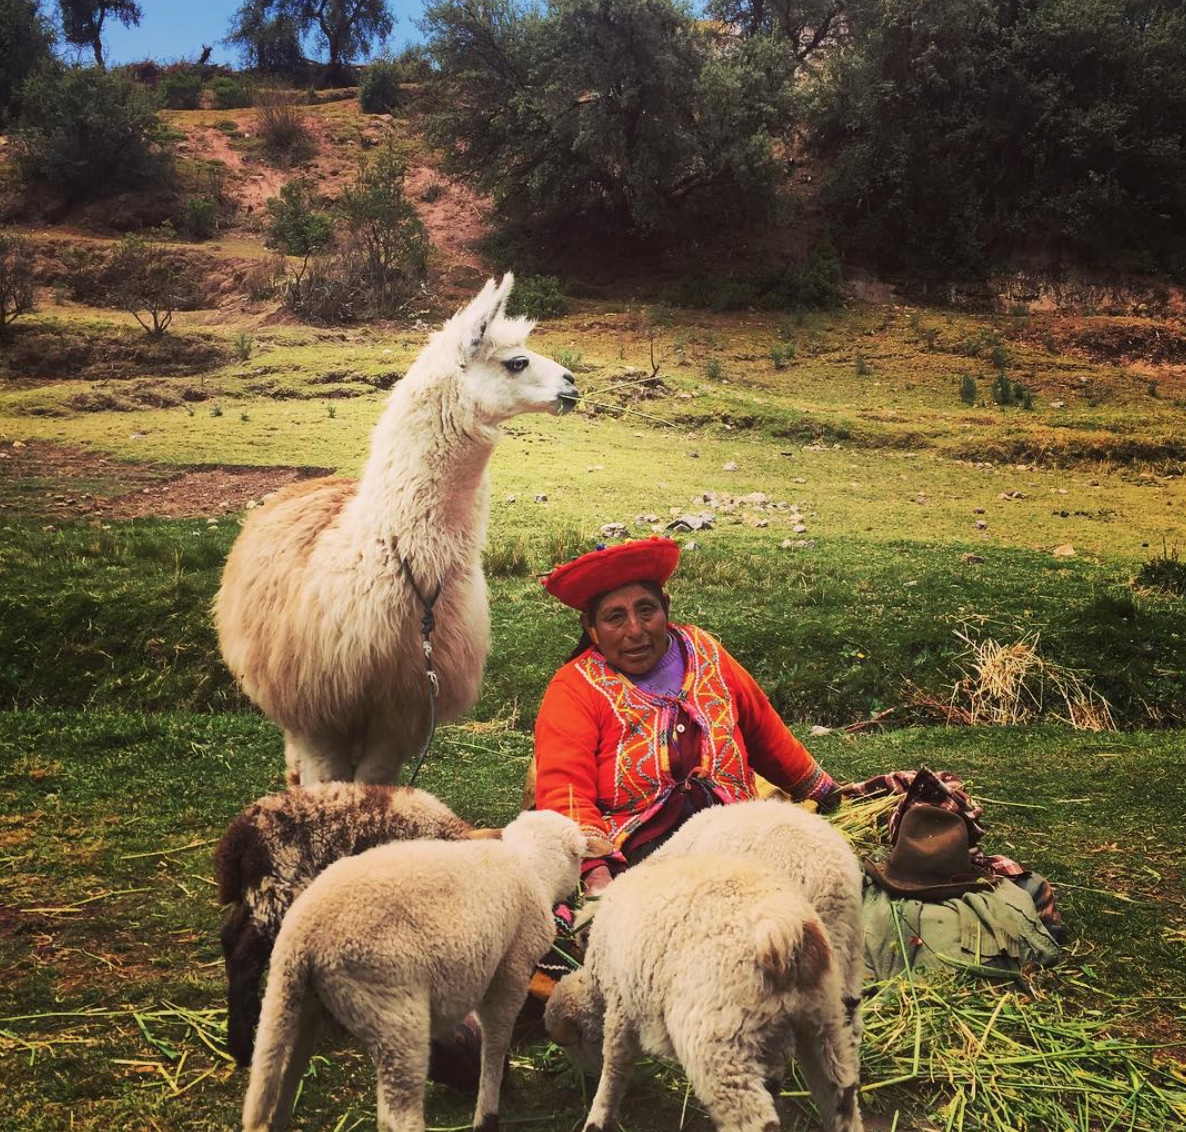 Working in Peru as an Expat